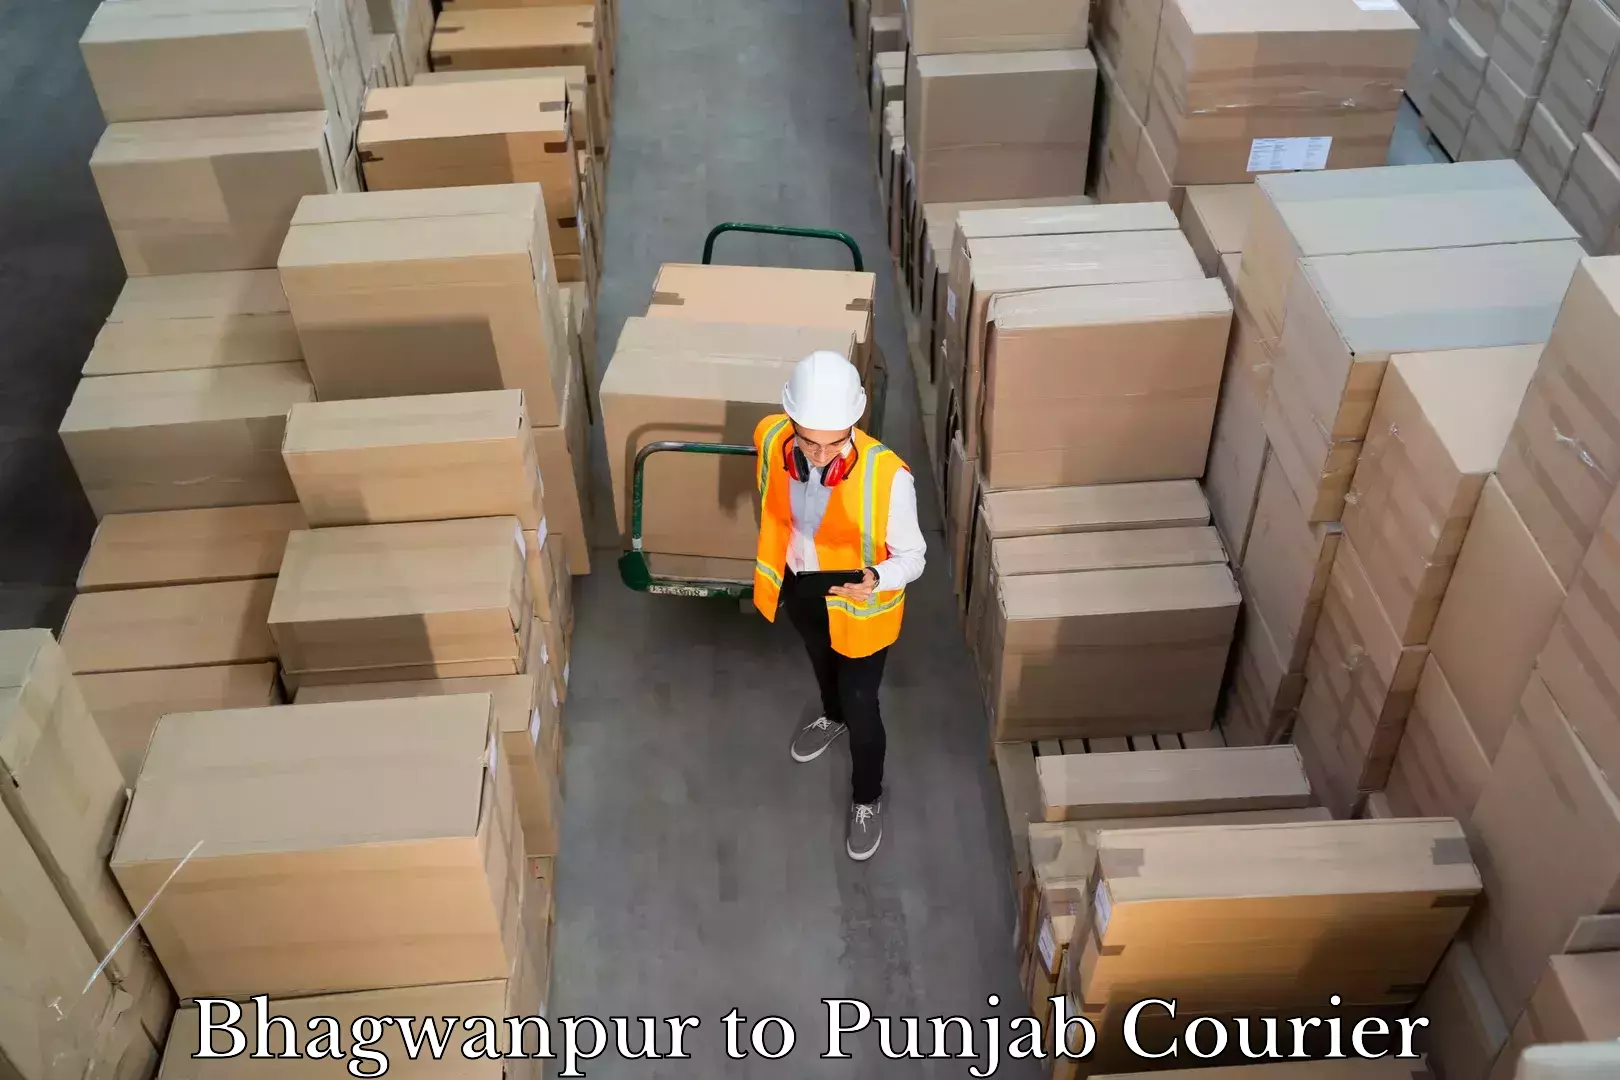 Baggage courier strategy Bhagwanpur to Punjab